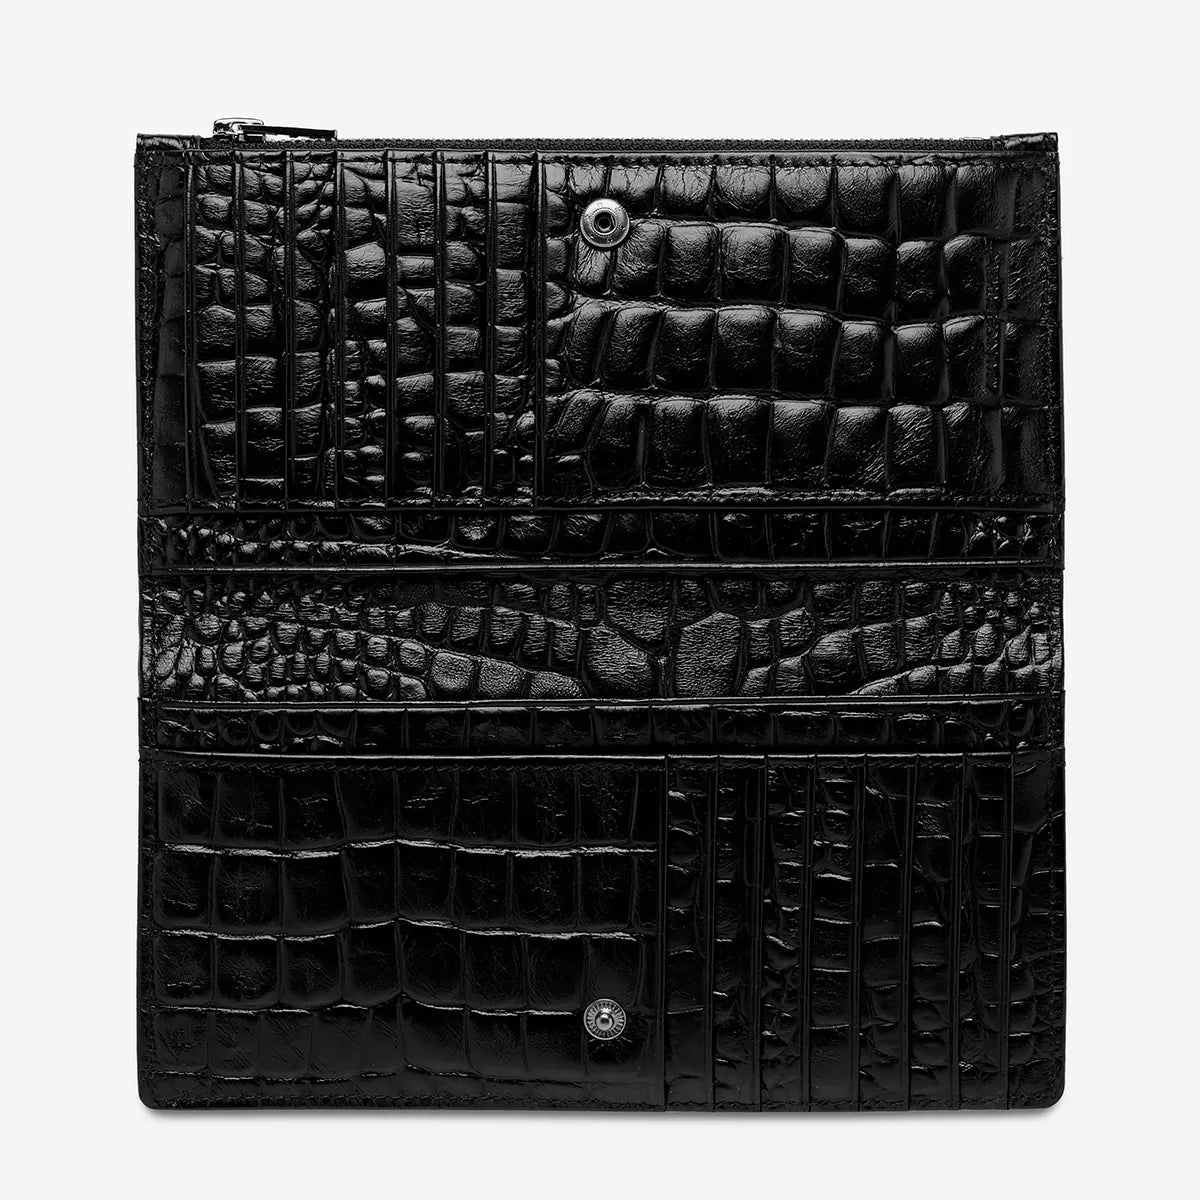 STATUS ANXIETY // Old Flame BLACK CROC EMBOSS